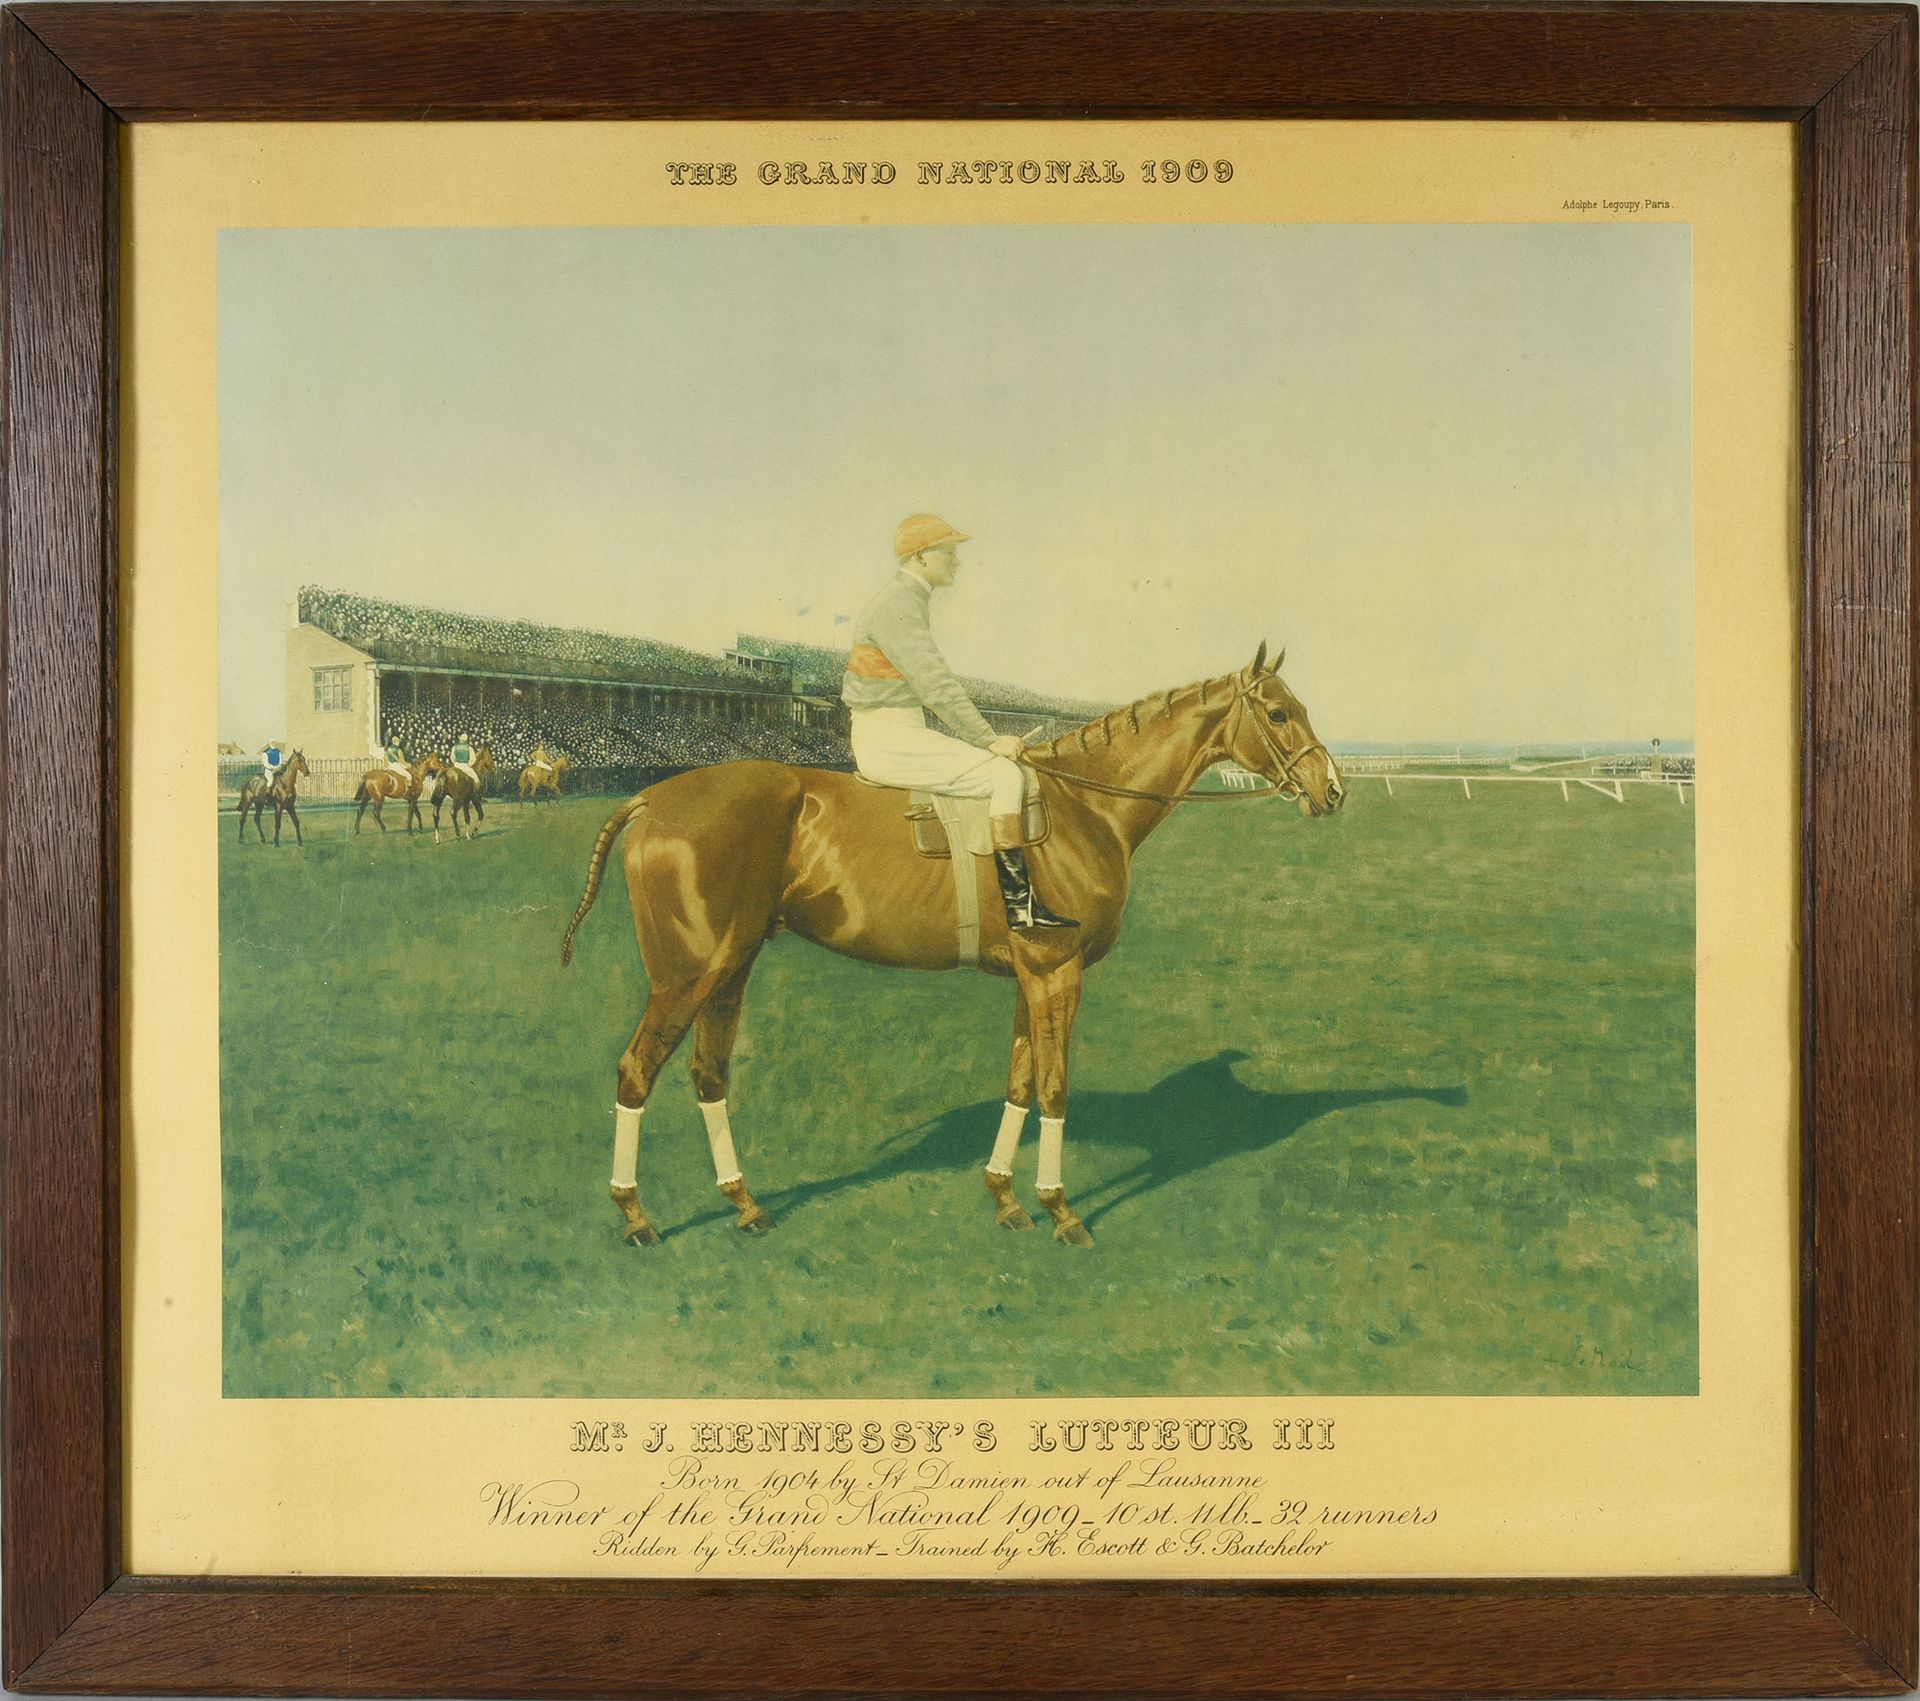 LE NAIL (XIX-XXe). Grand National 1909: Lutteur III appartenant à Mr Hennessy
Fa&hellip;